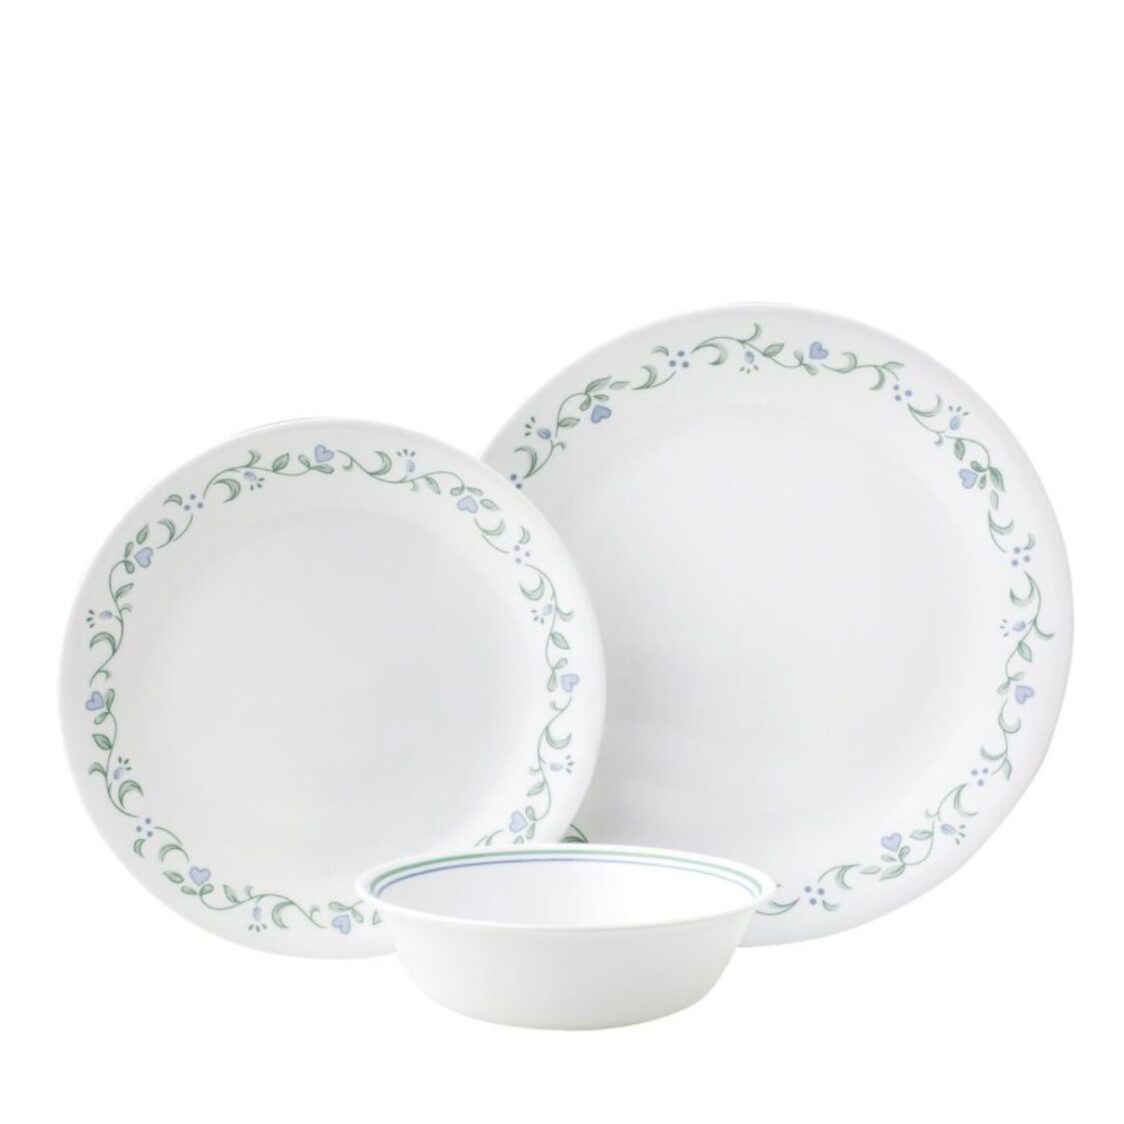 Corelle 12pc Dinner Set - Country Cottage 1114029